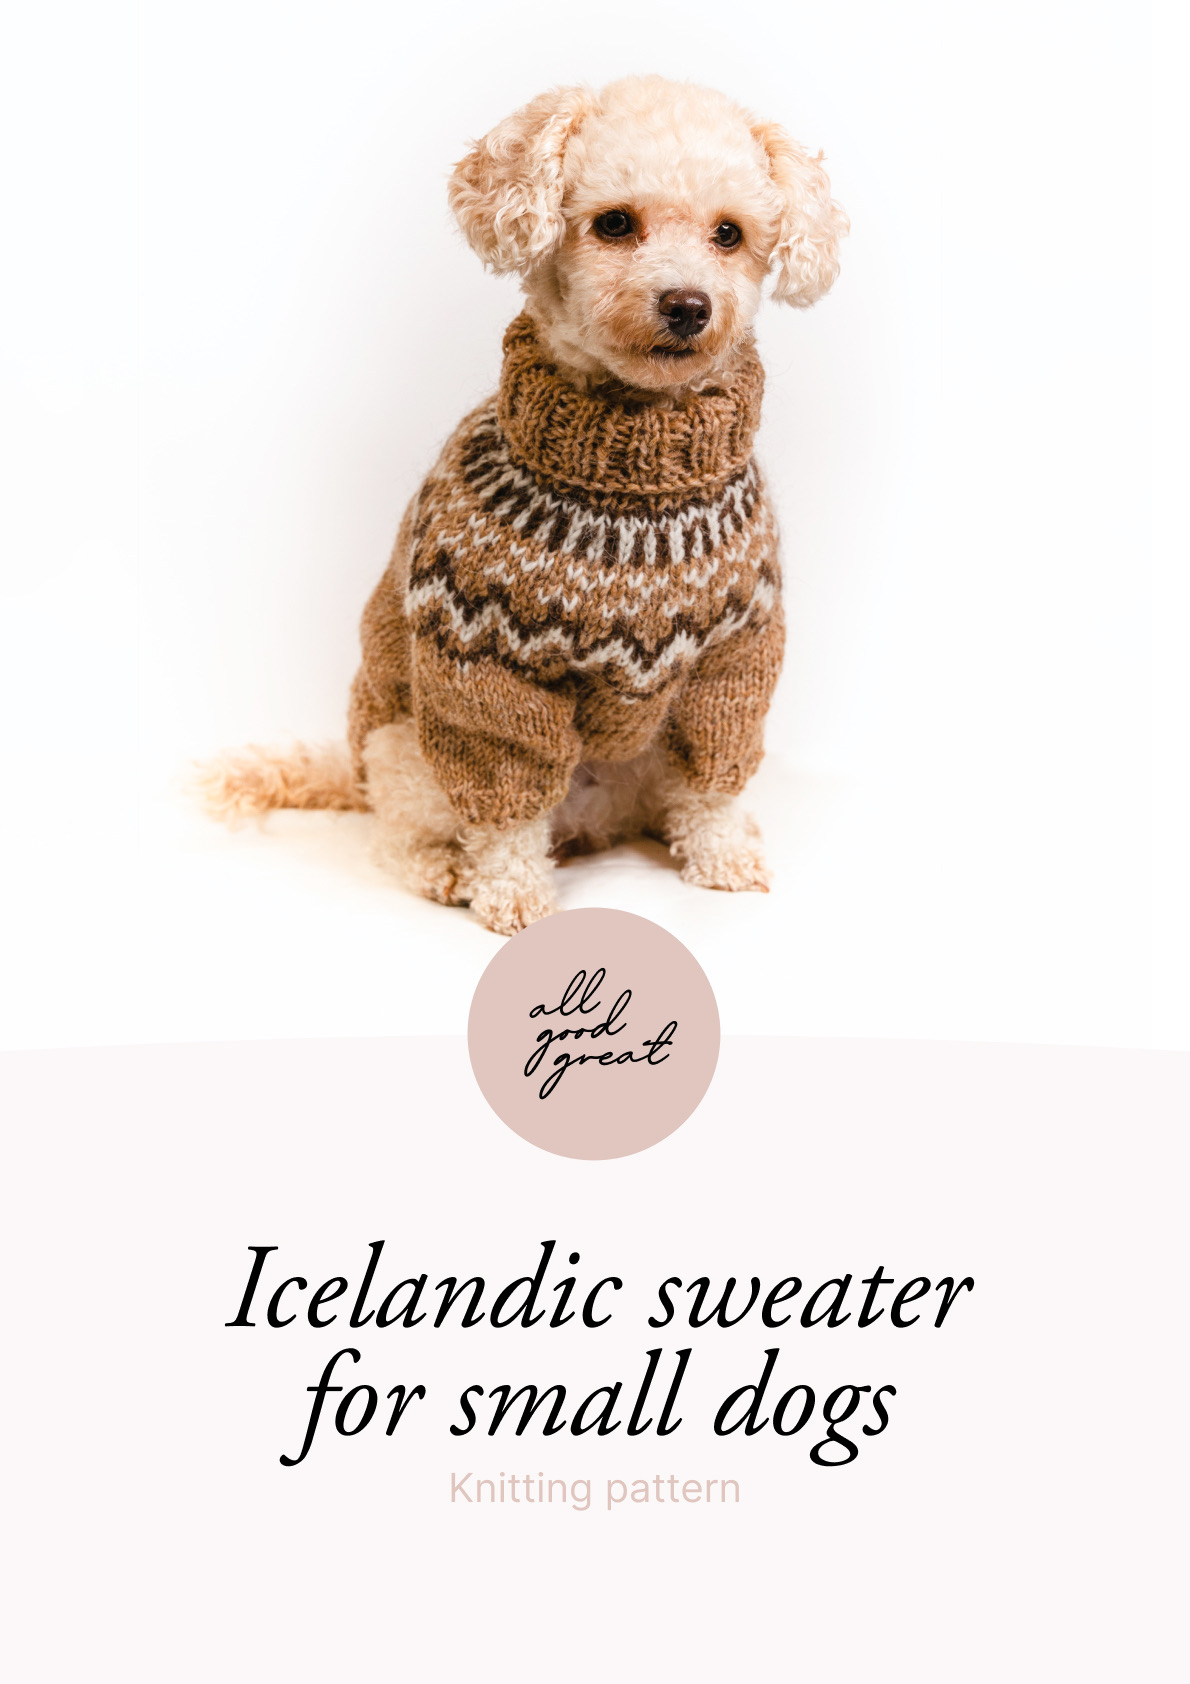 Knitting pattern: Icelandic sweater for small dogs (downloadable PDF) » All  Good Great